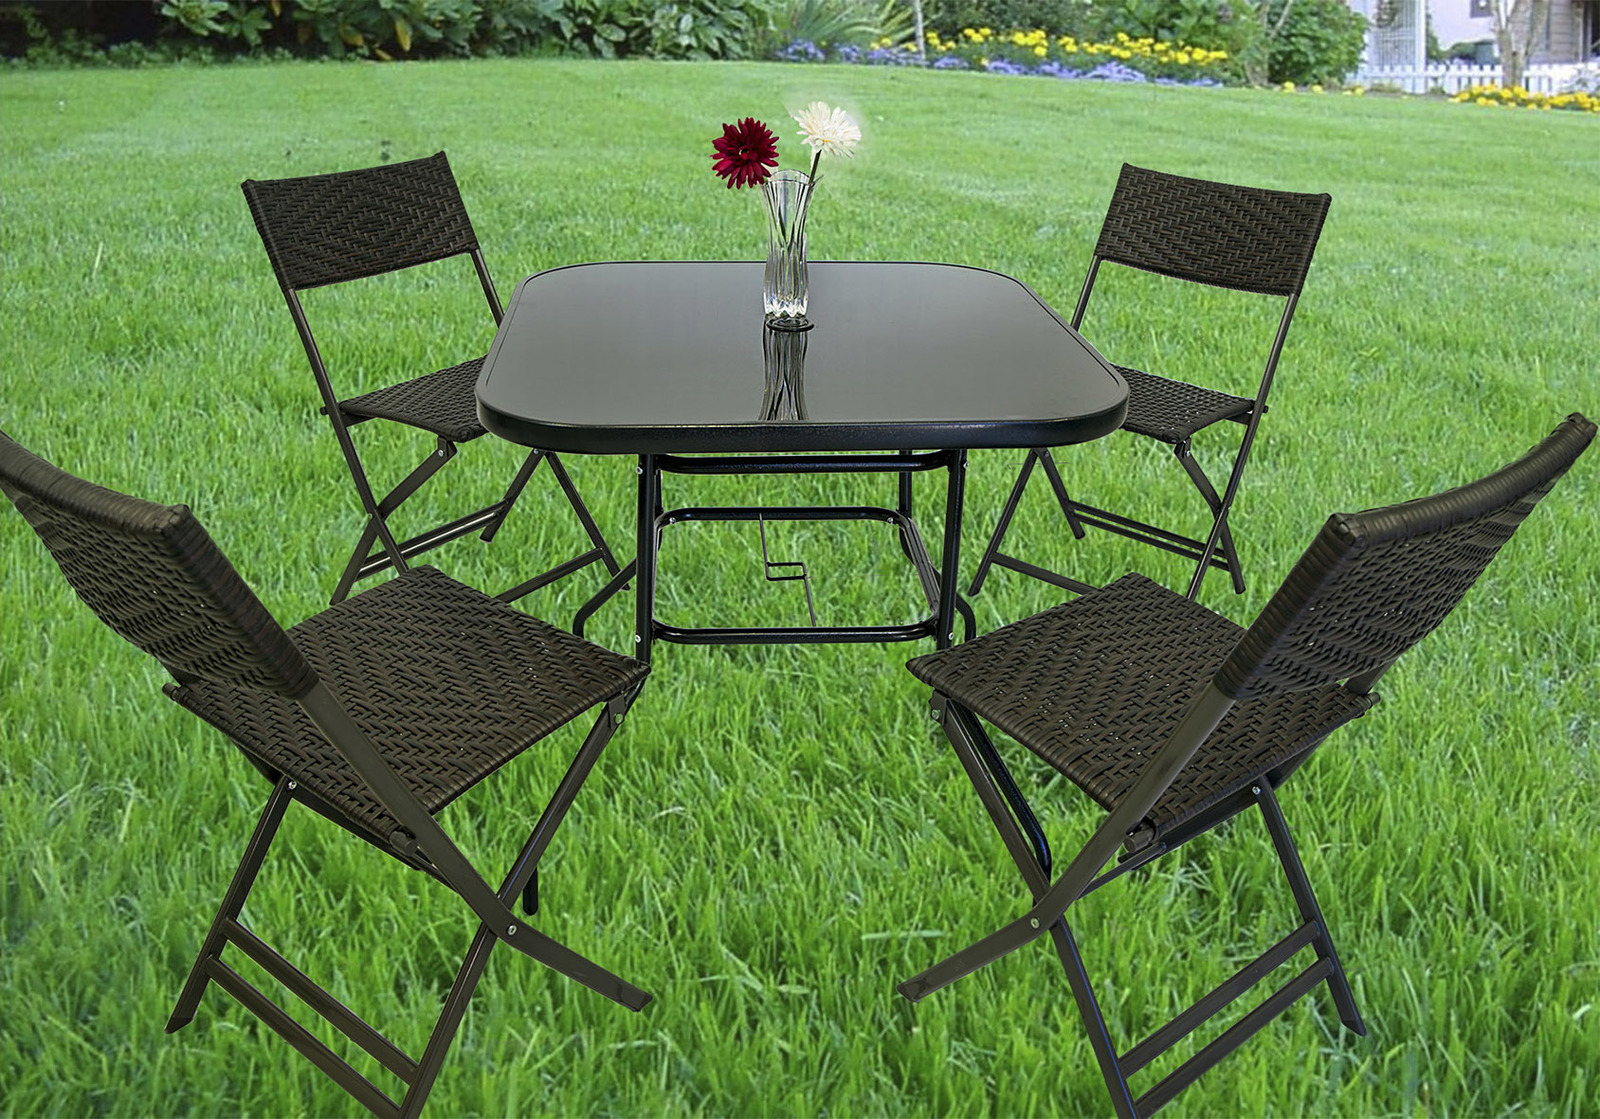 Alfresco 5 Piece Outdoor Setting (4 Rattan Chairs & Square Table)